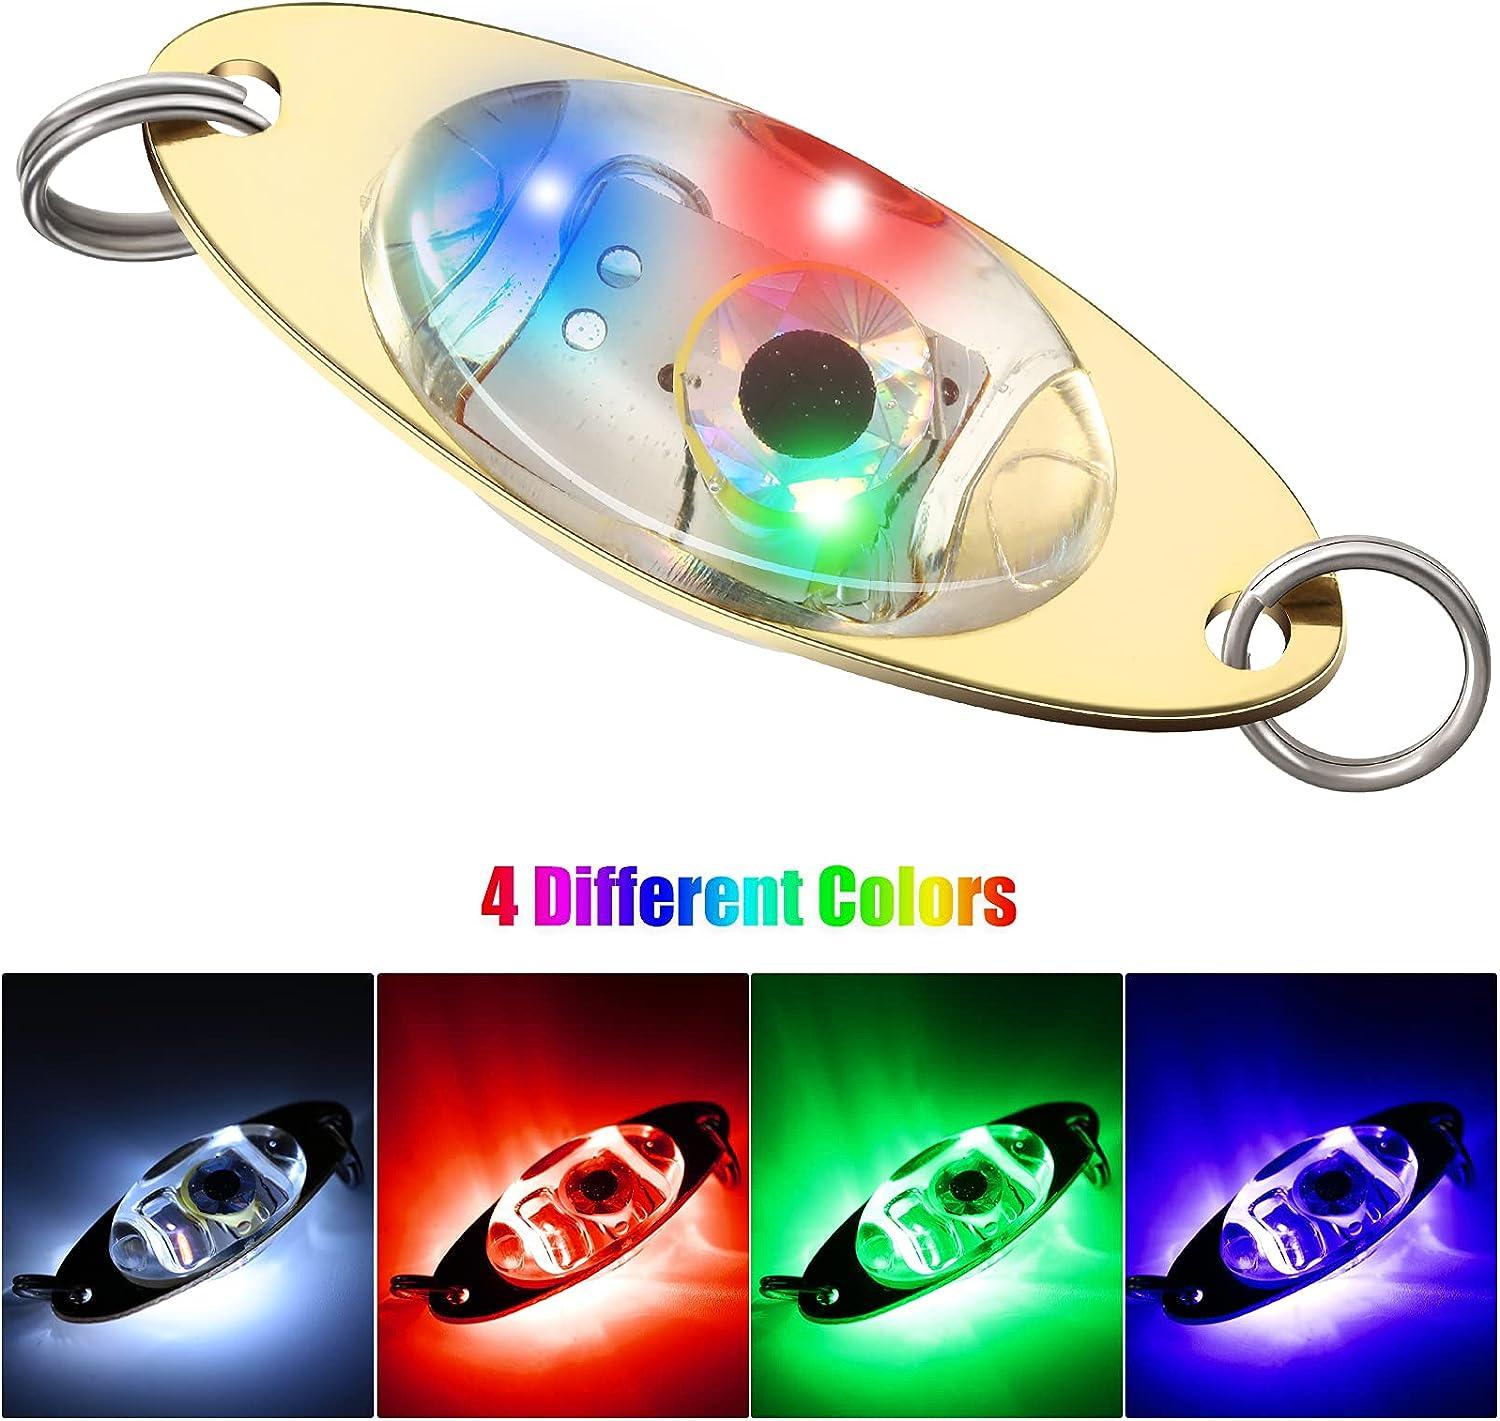 LED Fishing Lures Fishing Spoons Underwater Flasher Bass Halibut